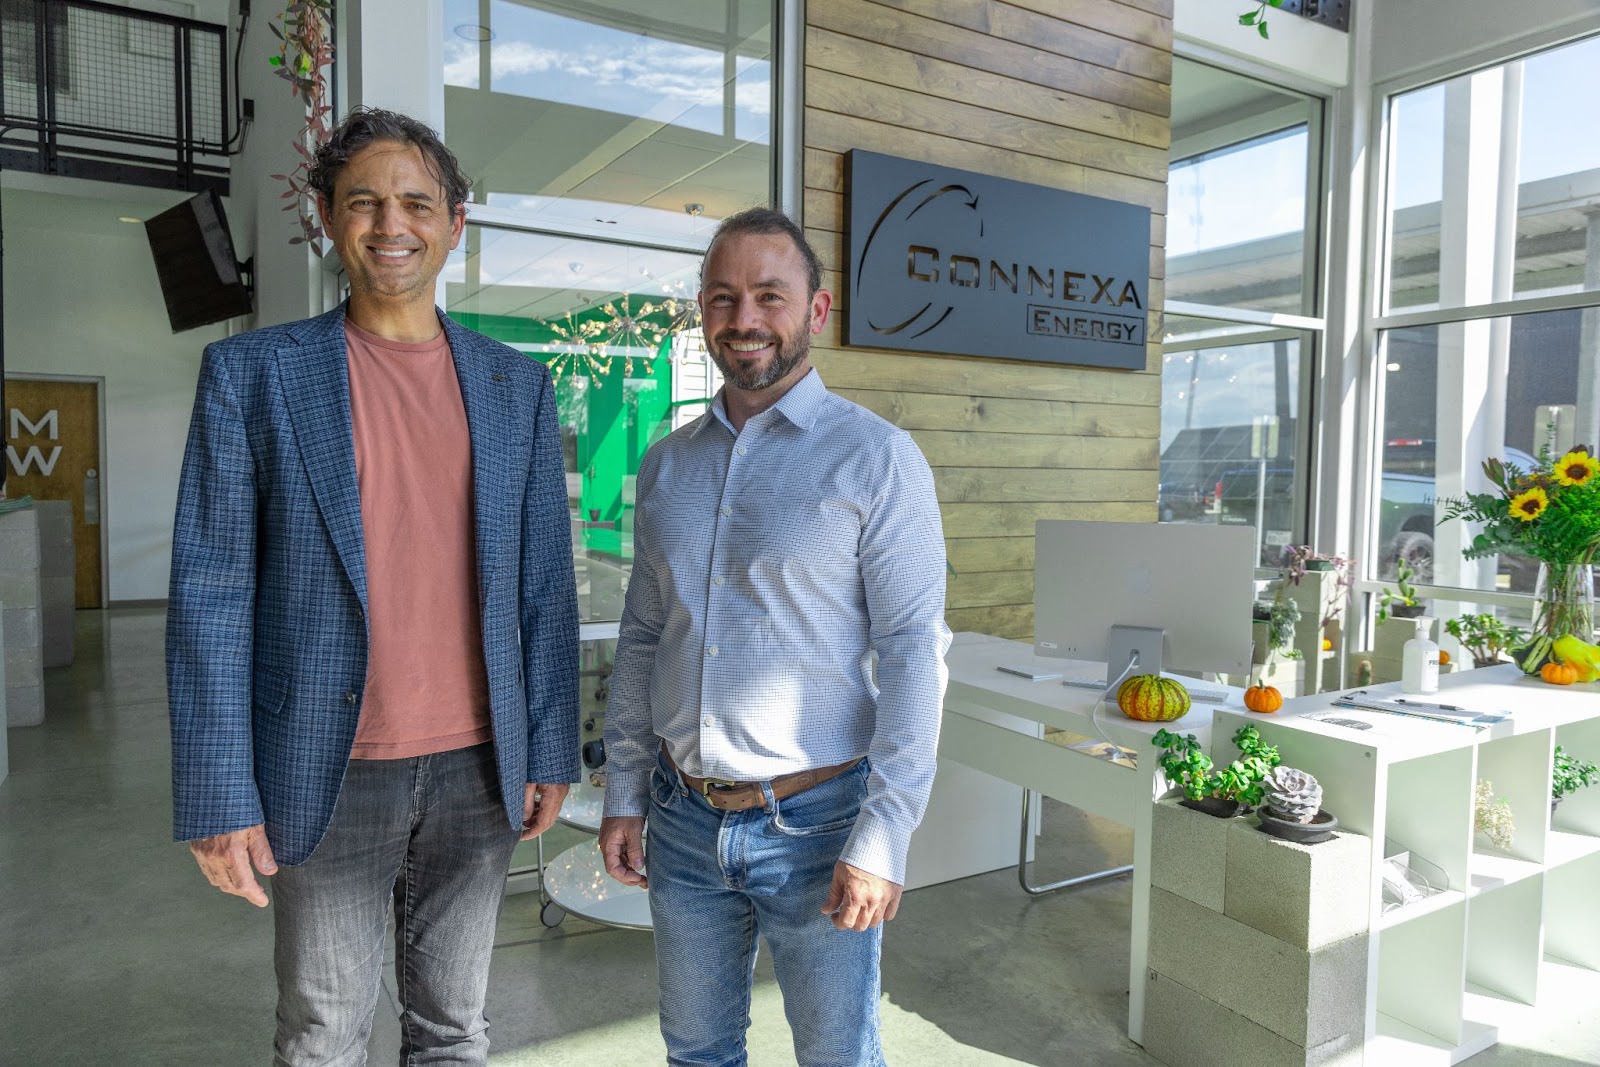 CEO of Dragonfly Energy is smiling standing next to Michael Postel, Founder and President of Connexa Energy, who is standing and smiling. The two are standing in Connexa Energy's headquarters.